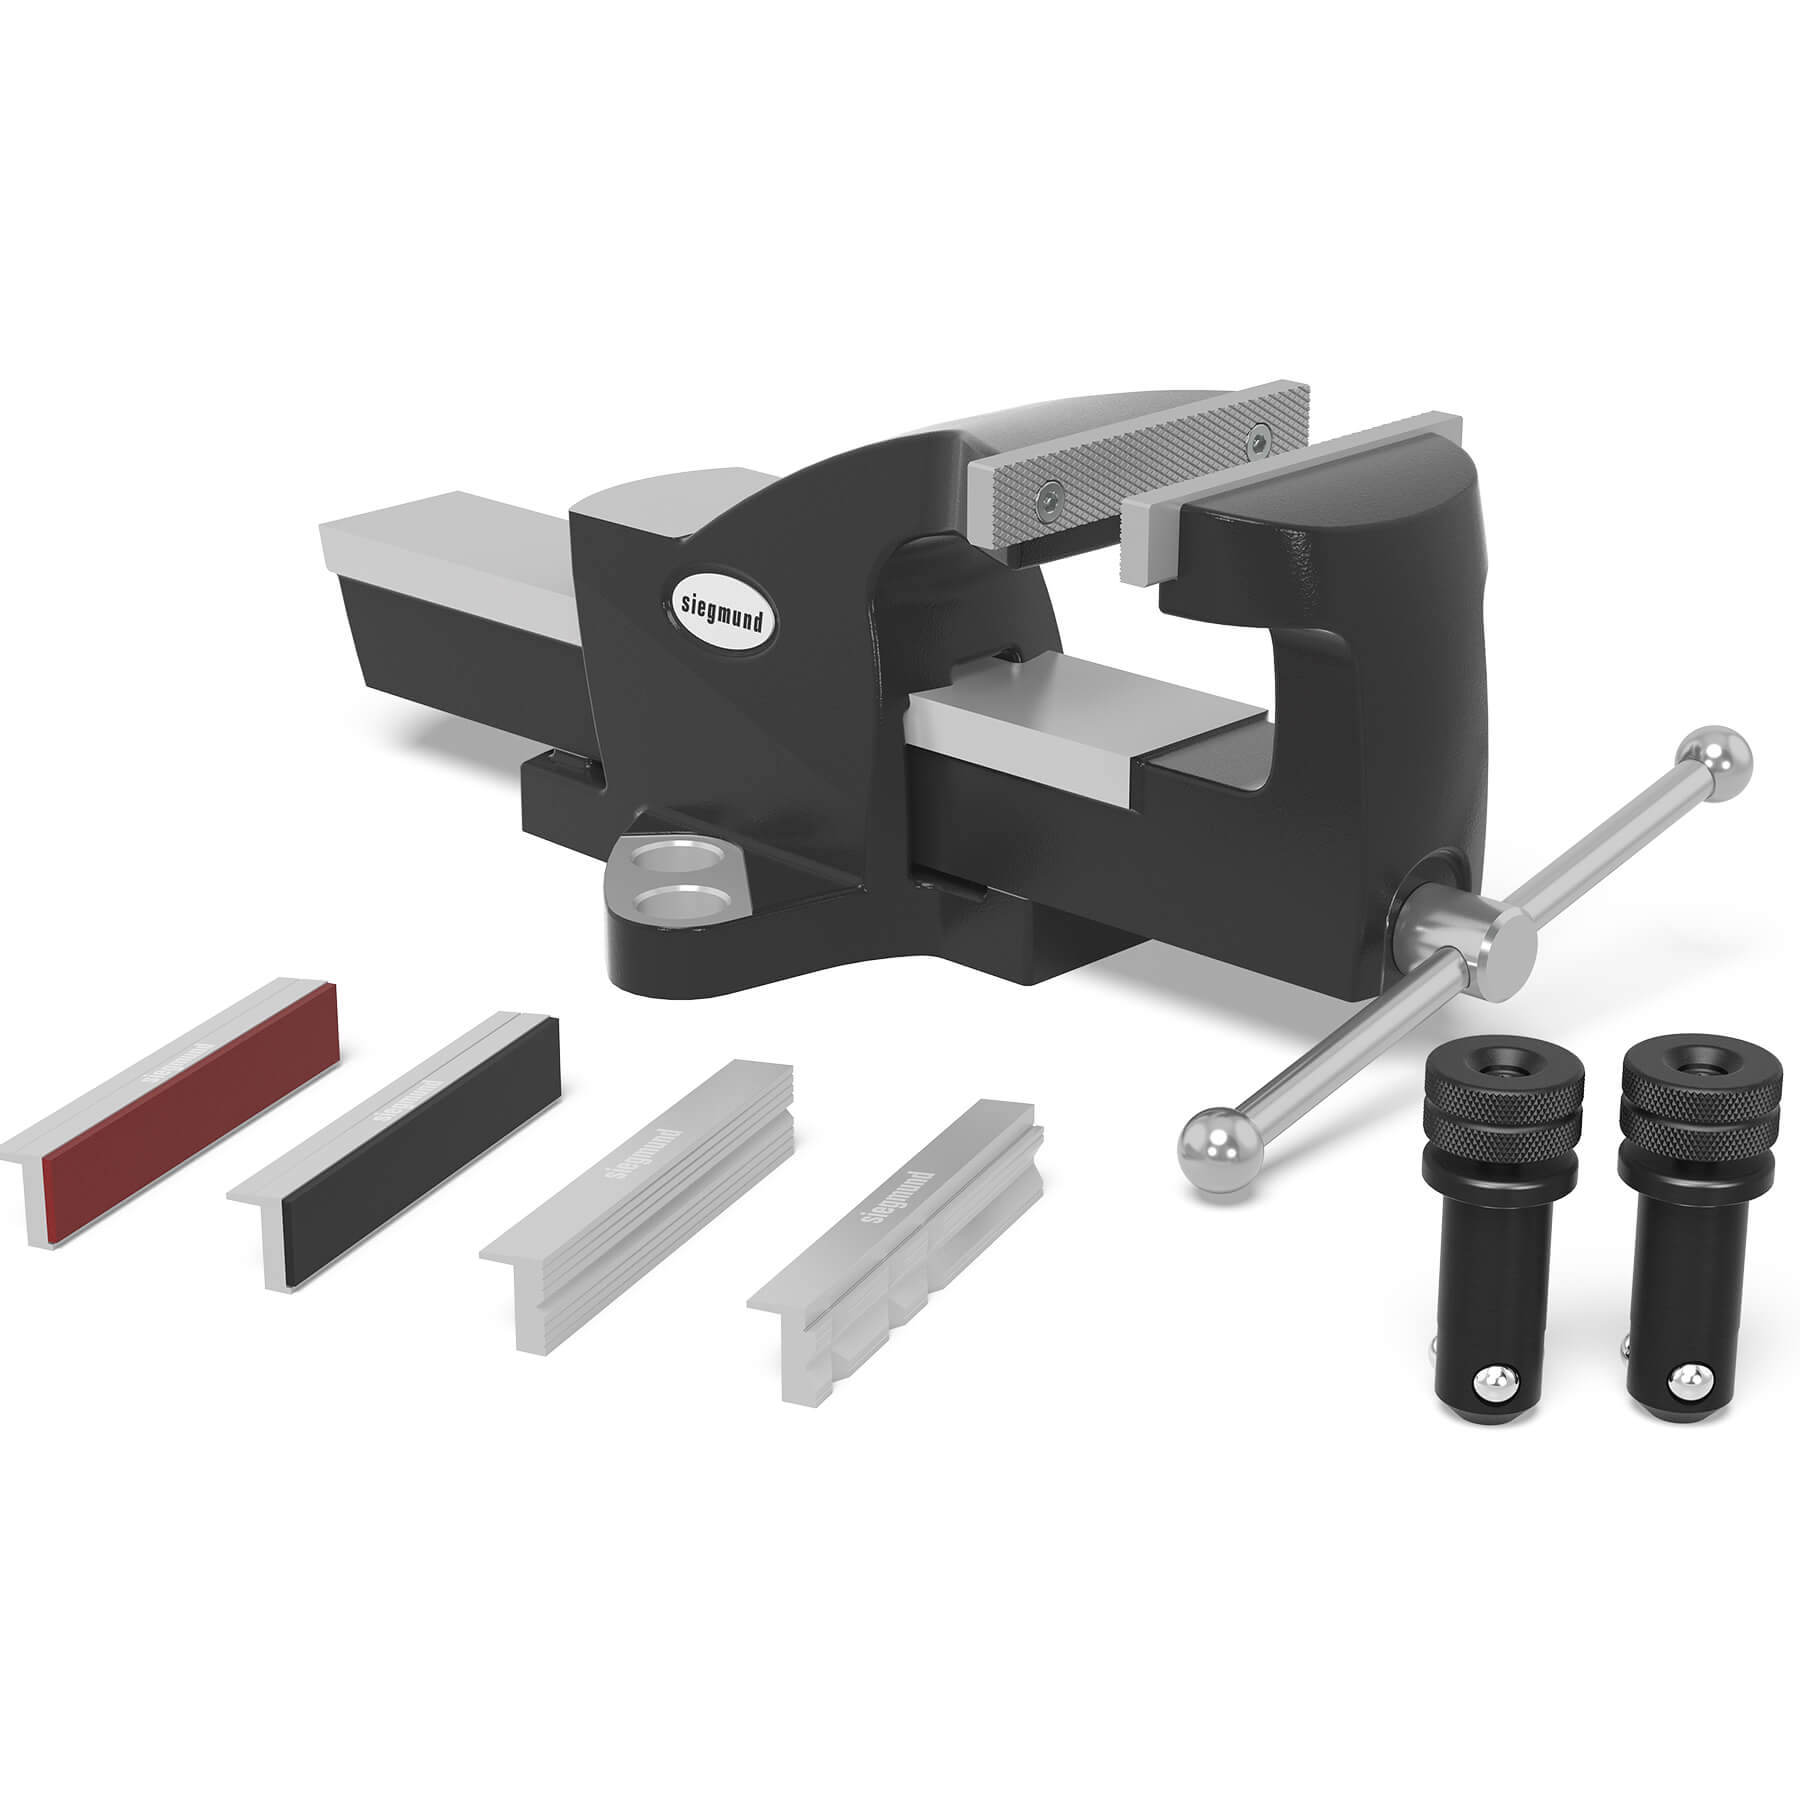 2-284330: Bench Vise 150 for System 28 with 150 Vise Jaw Cover Set